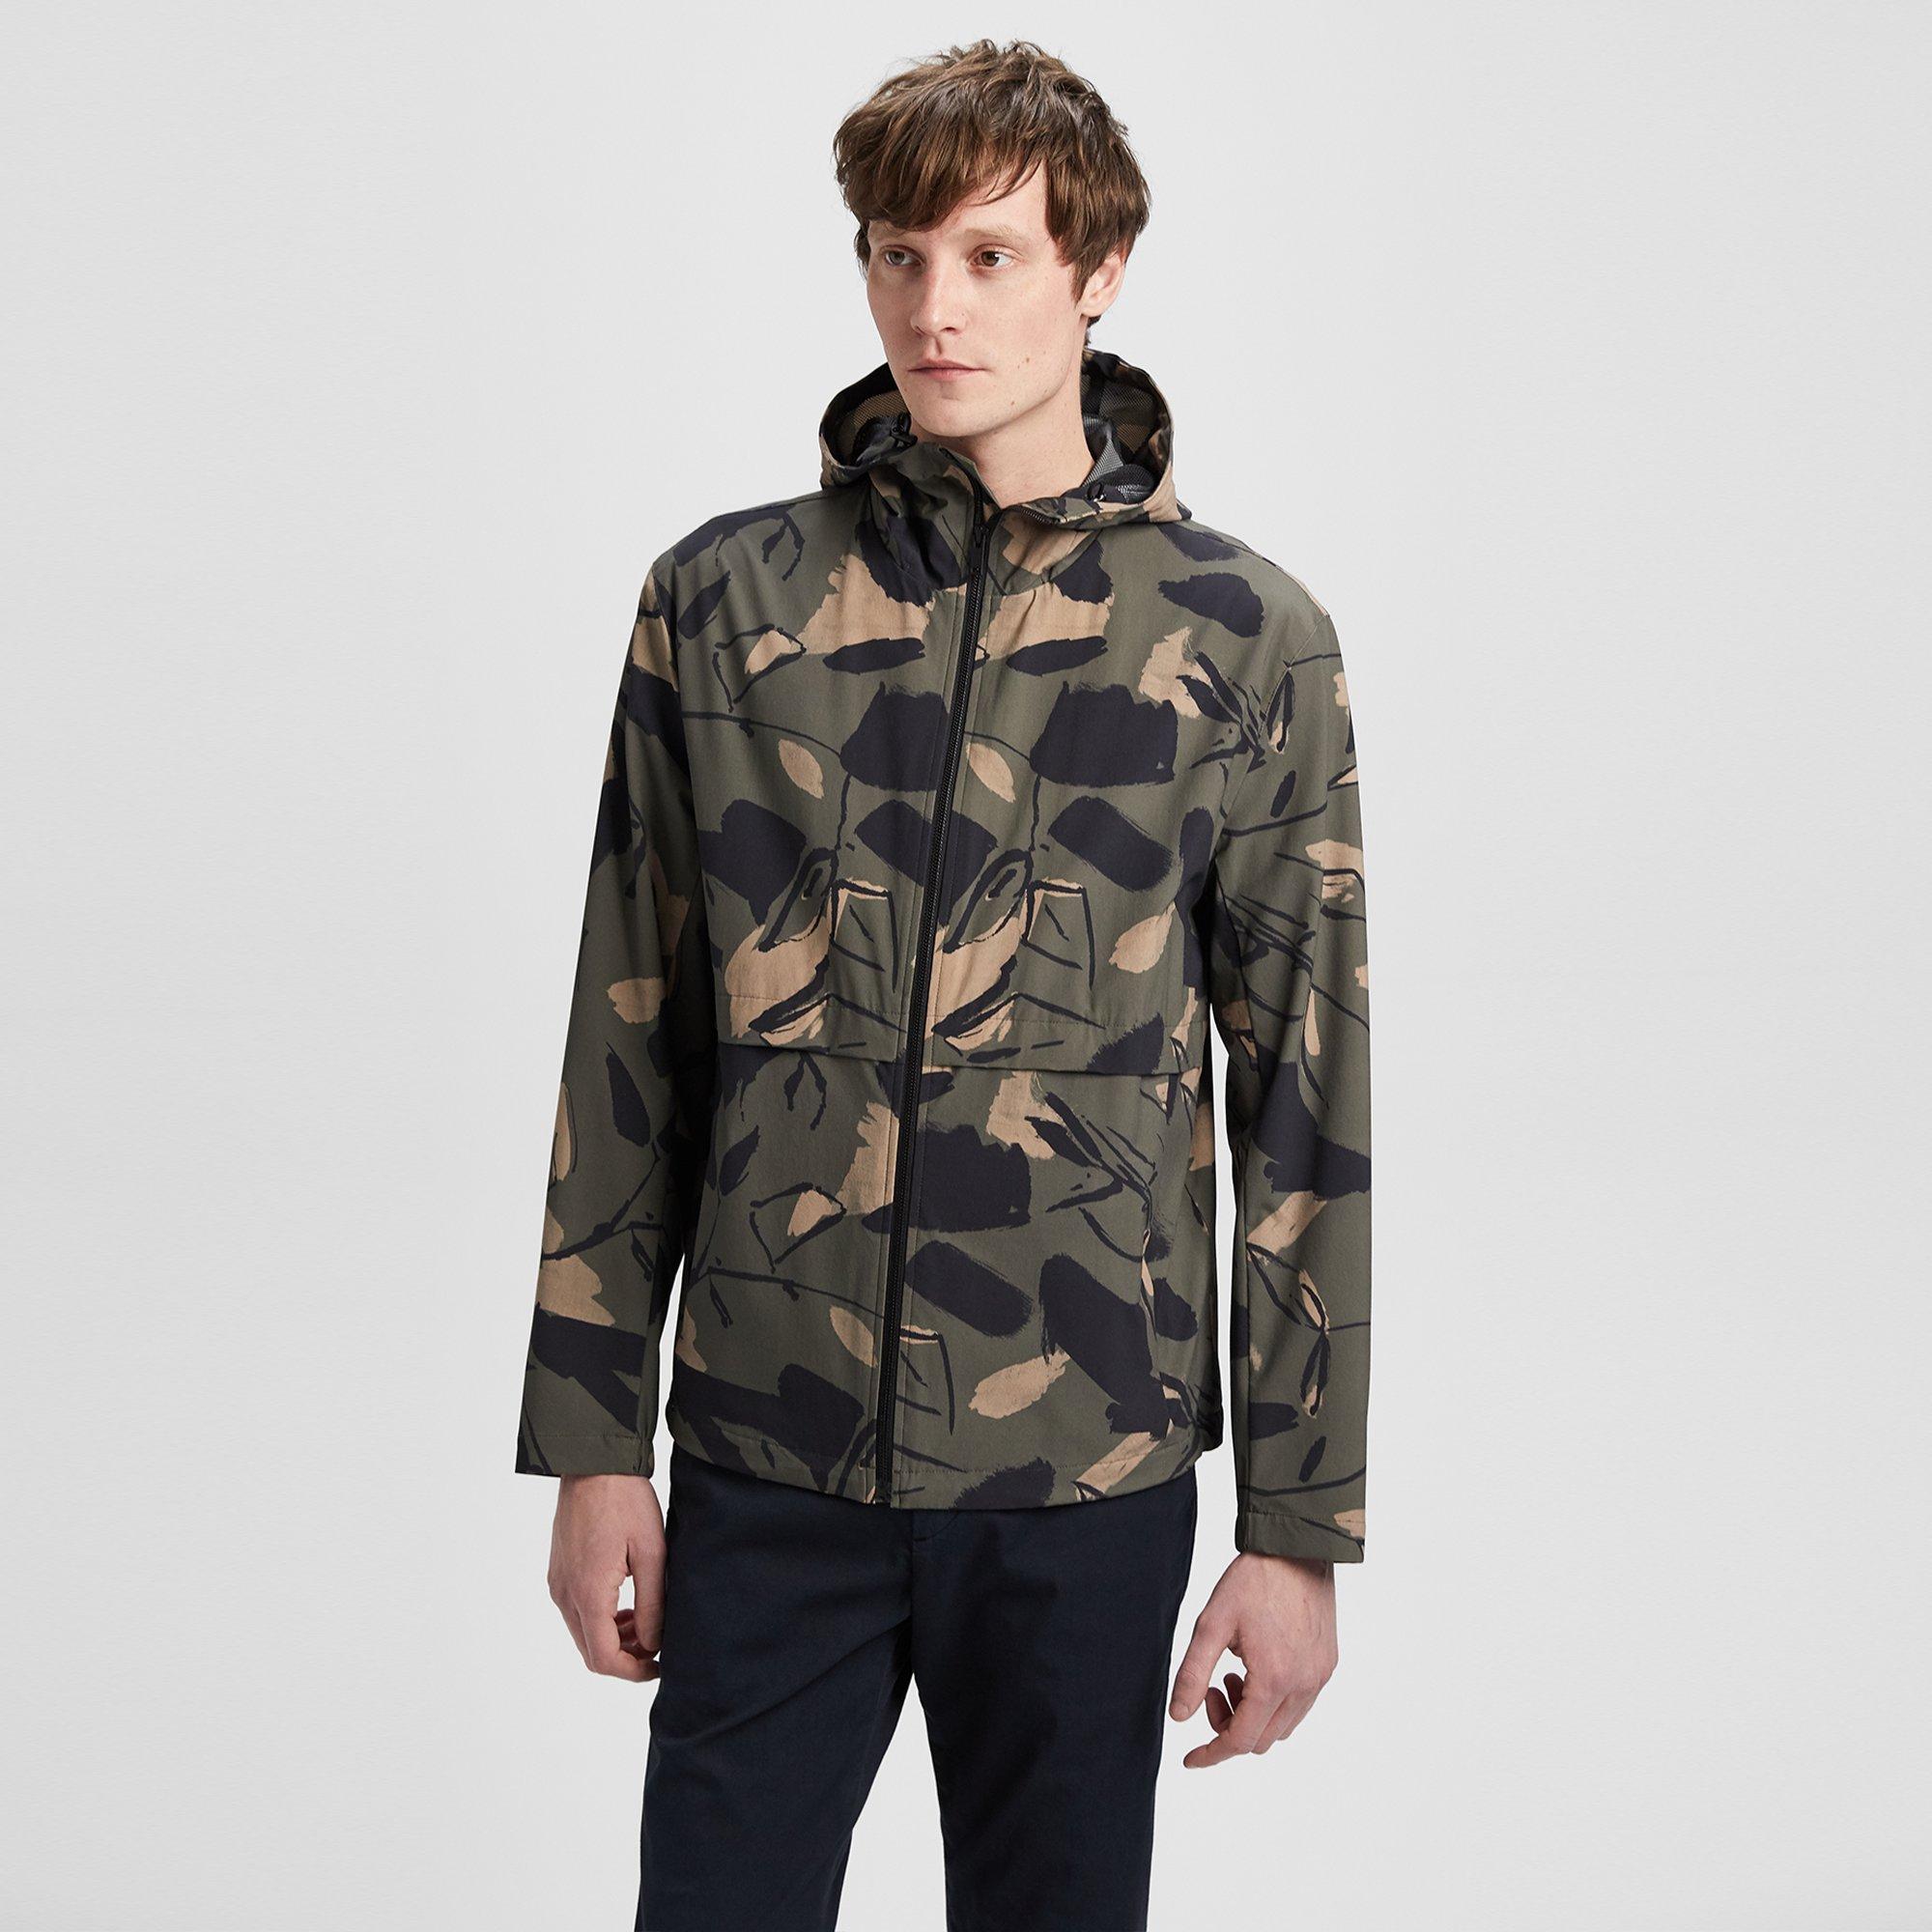 Piket hoogte Trechter webspin Theory Official Site | Camo Hooded Tech Jacket